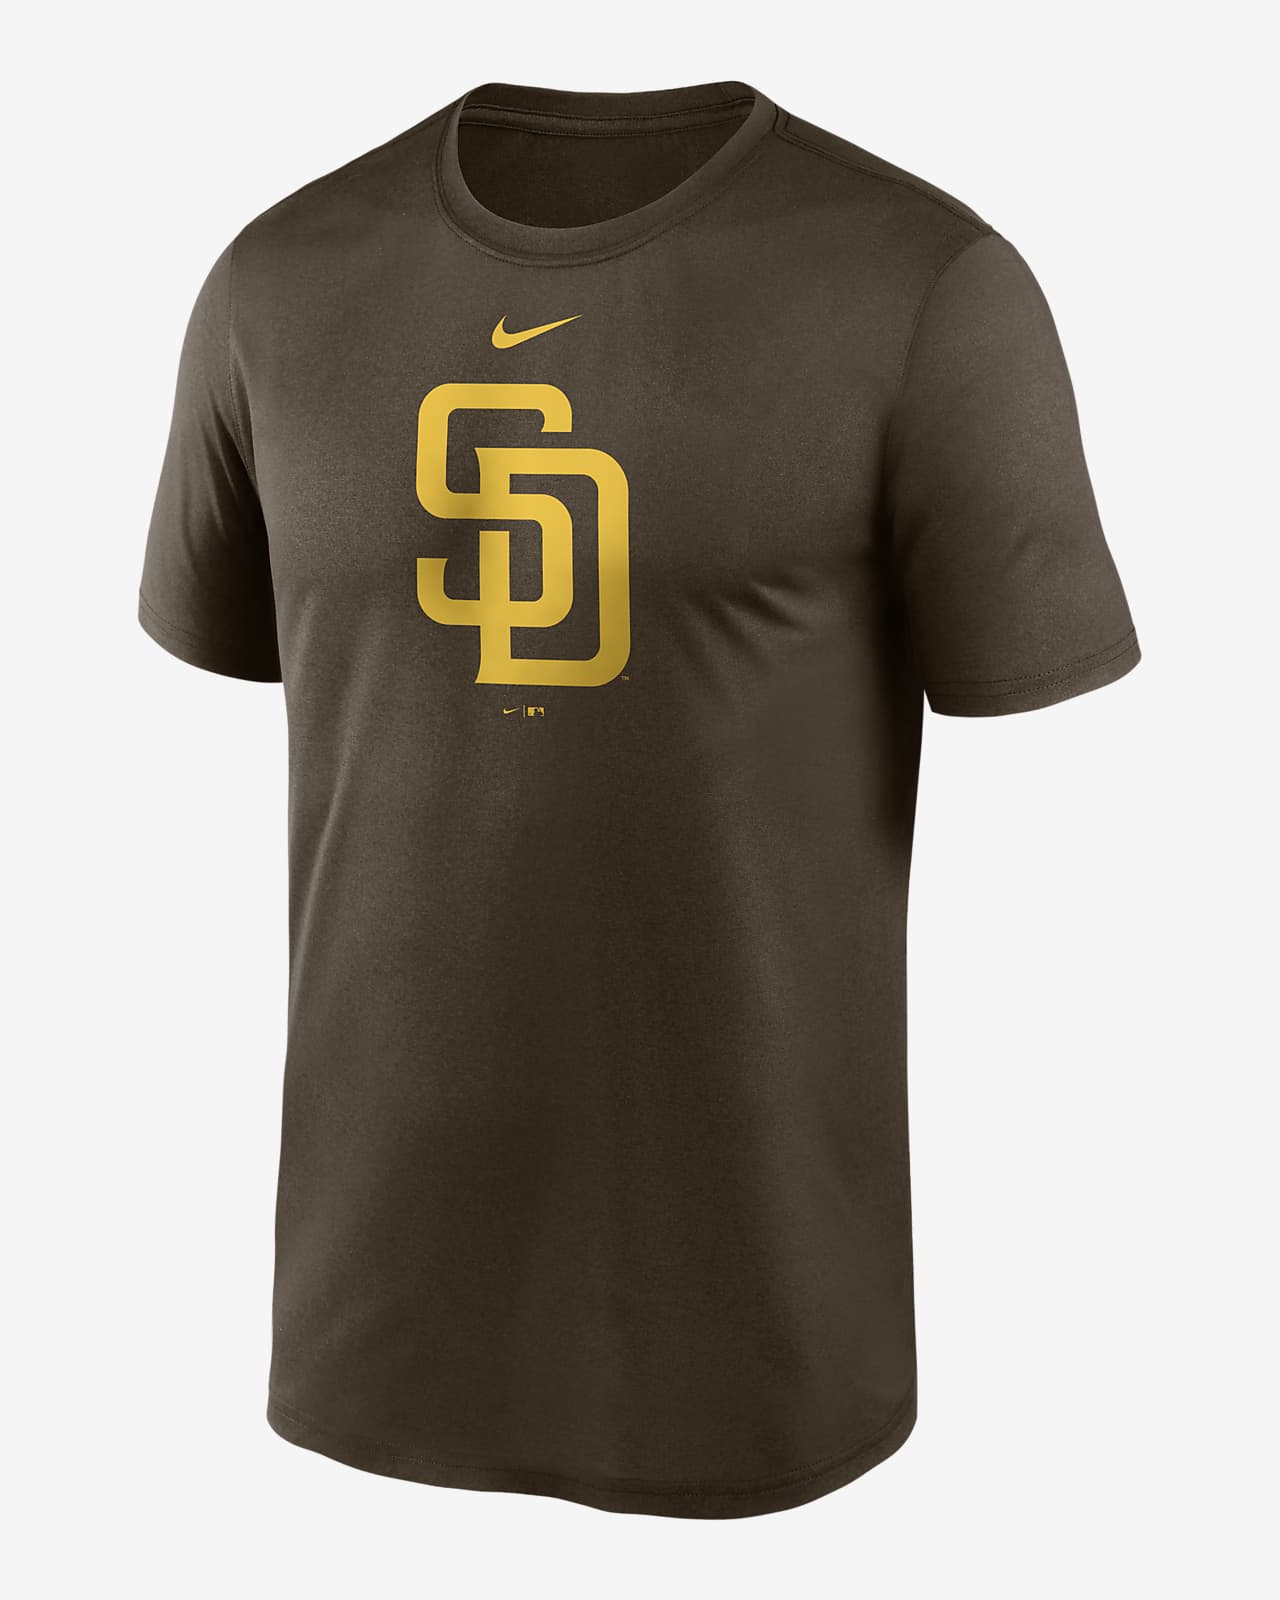 Nike San Diego Padres Men's Name and Number Player T-Shirt